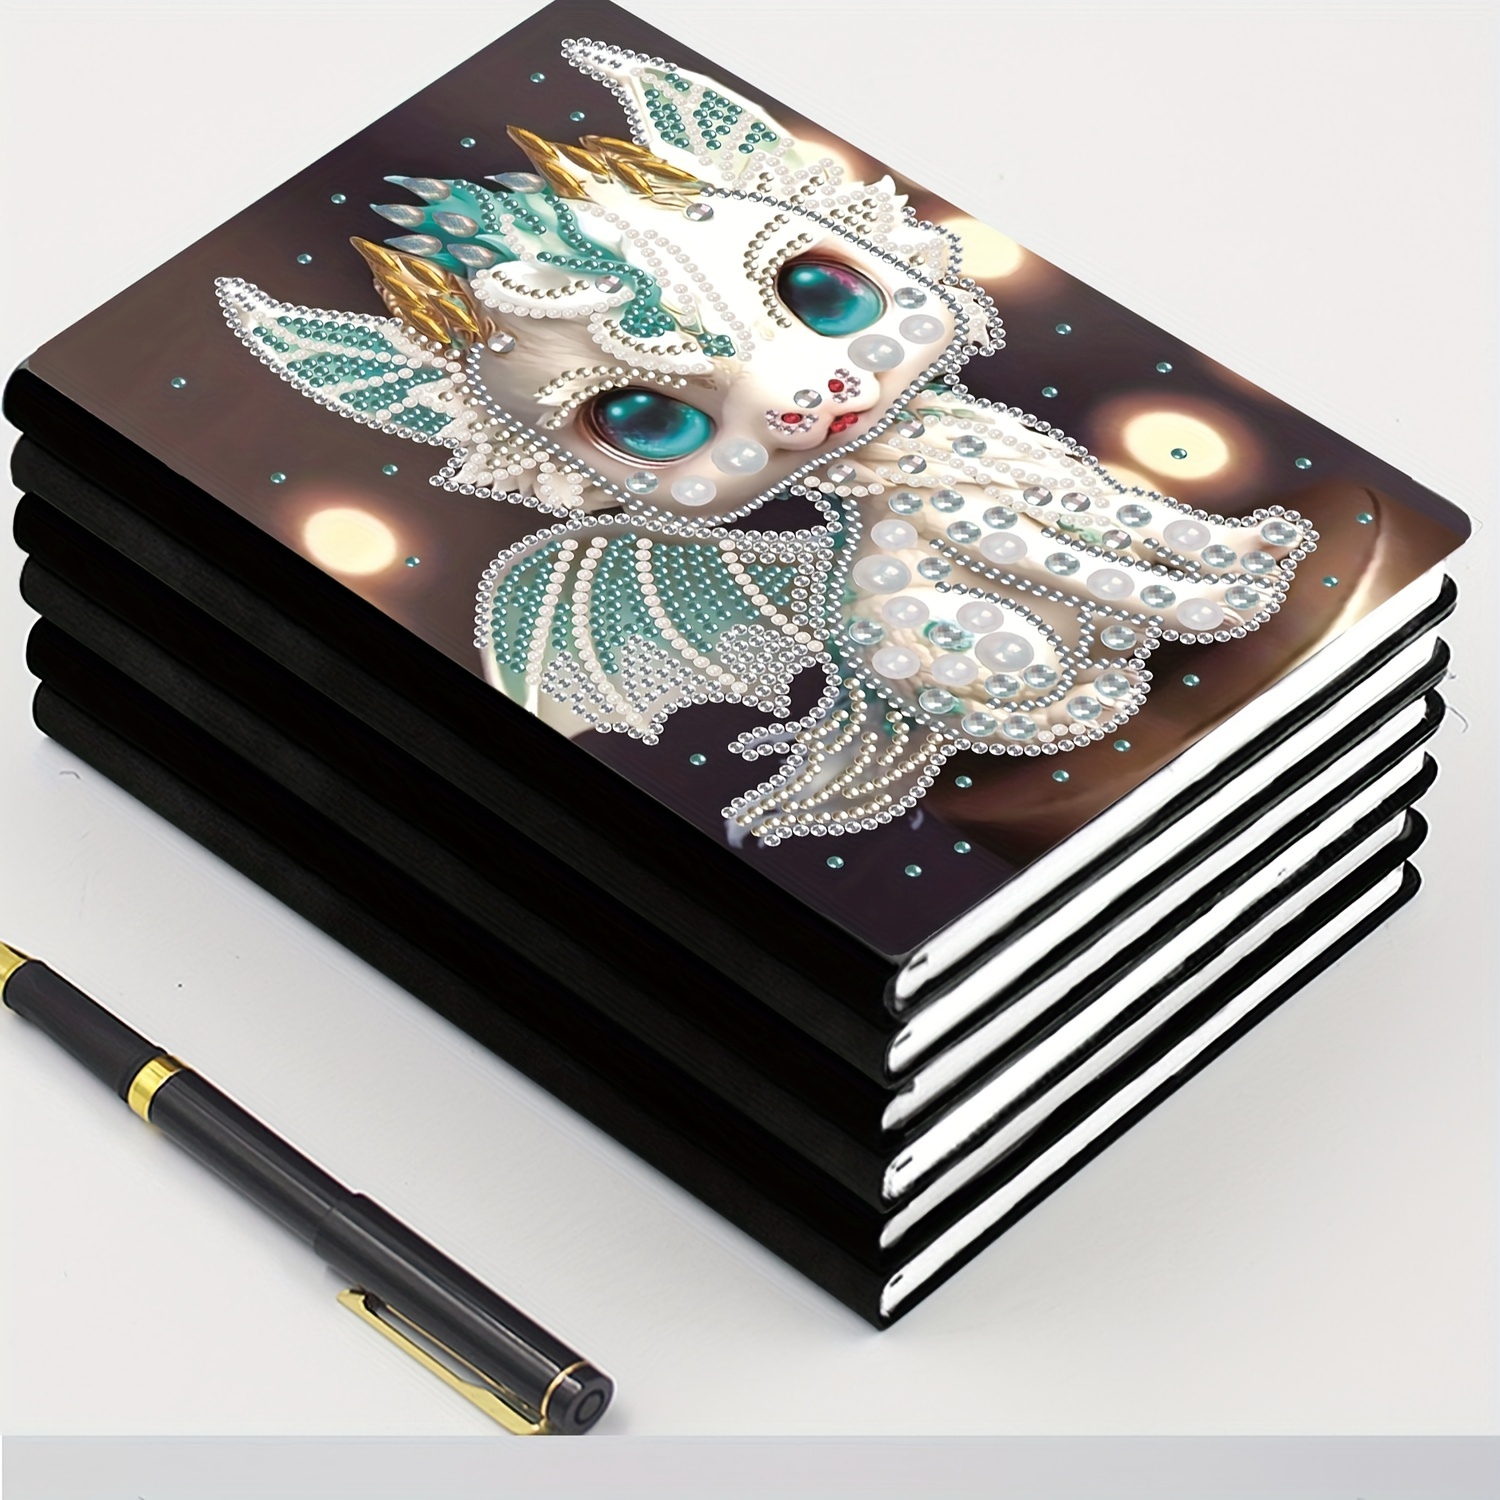 Crystal Art Diamond Painting Notebook - Cats in The Library - Create a  Sparkling Notebook Cover Using Crystals - for Ages 8 and up